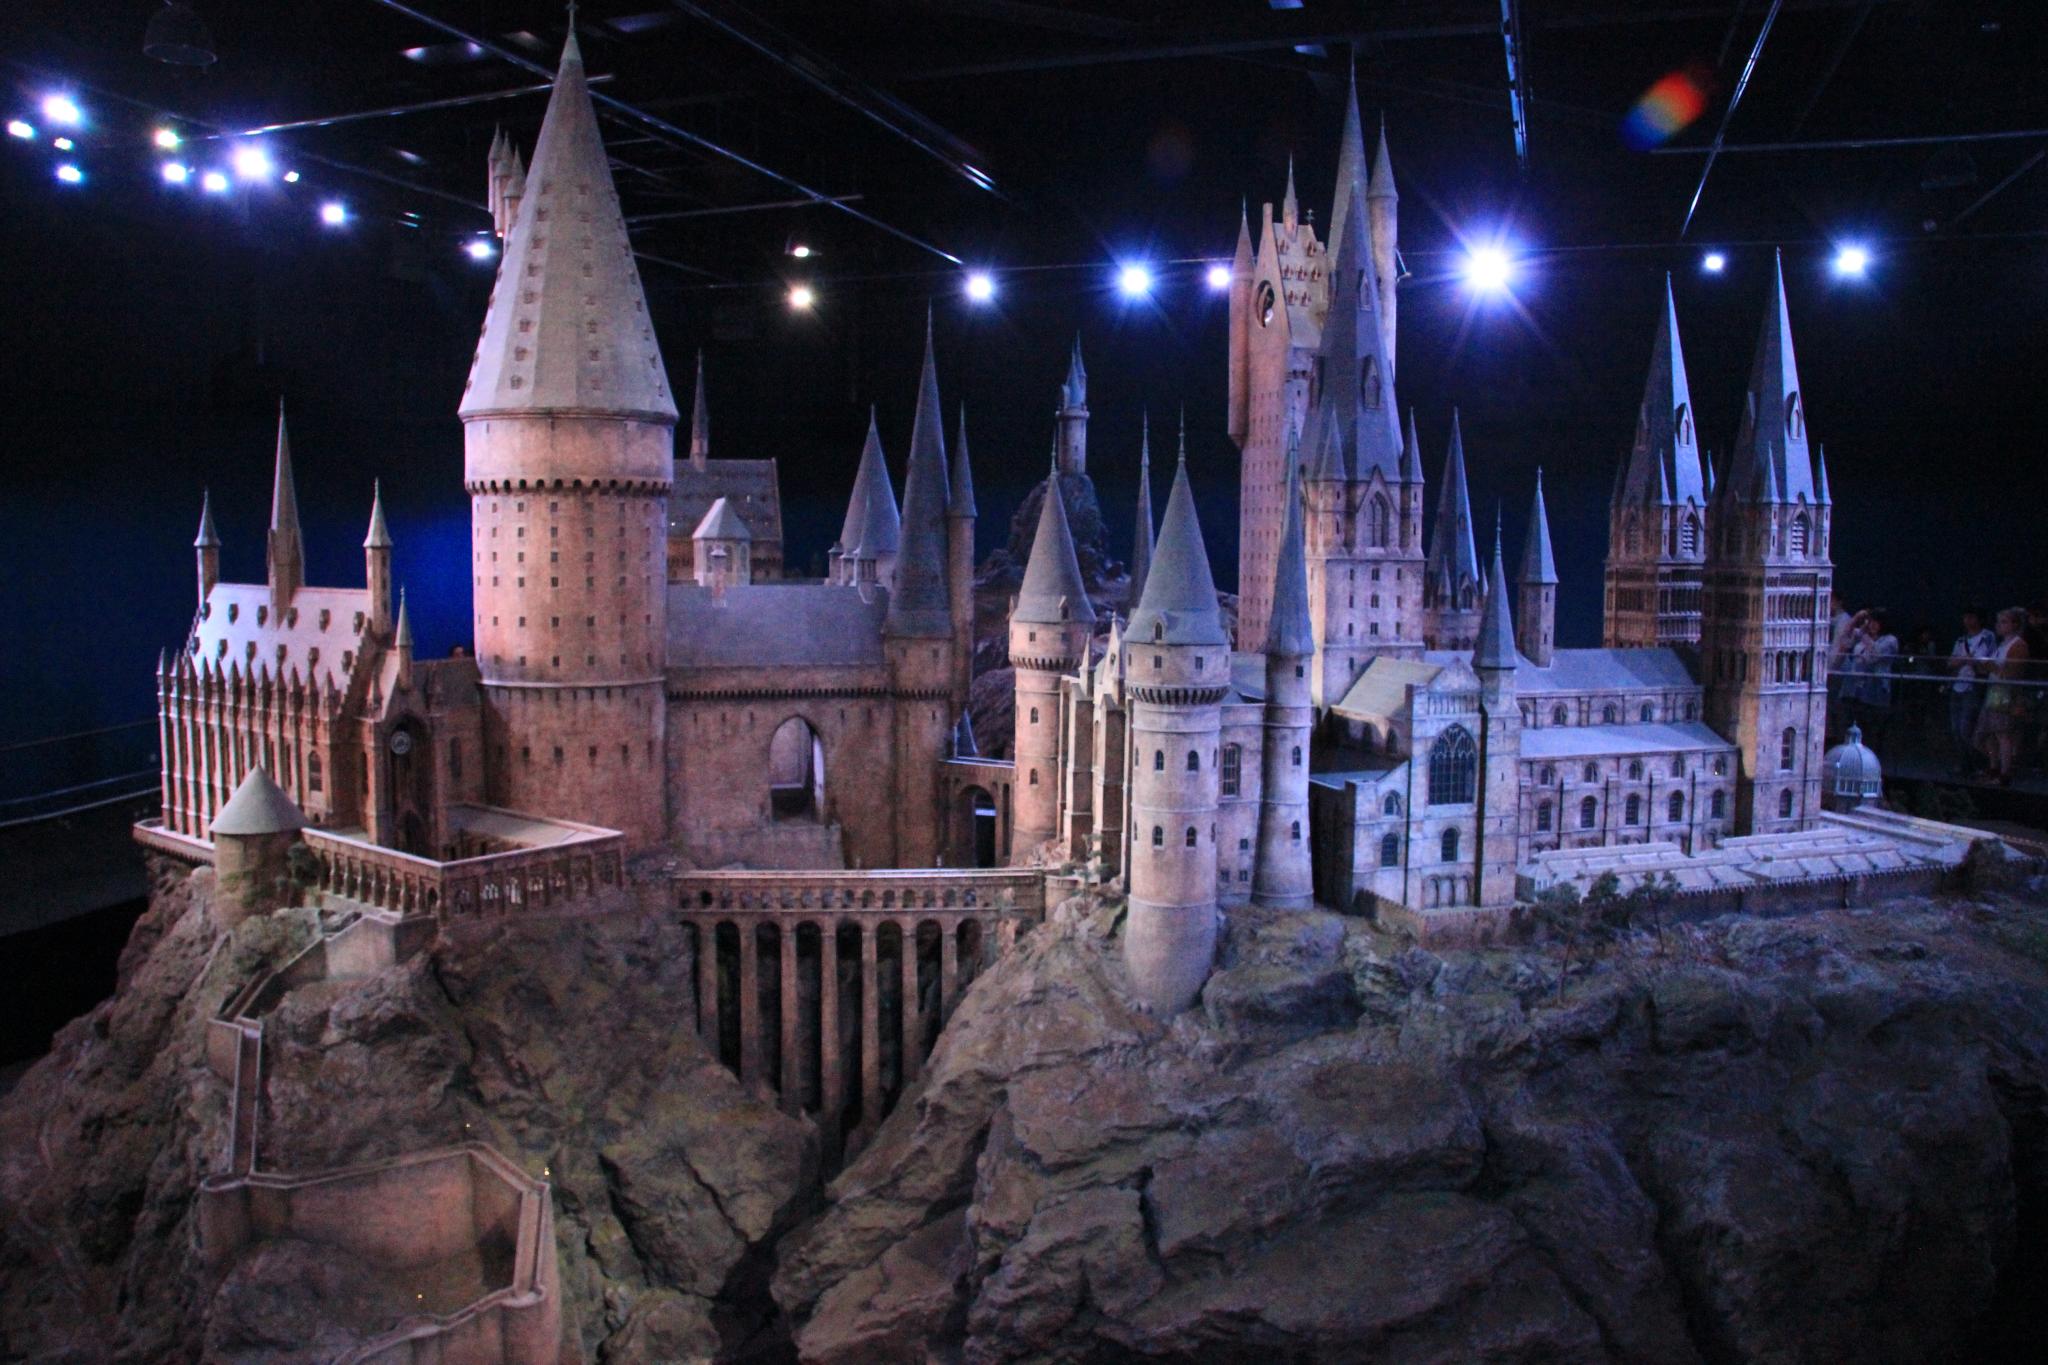 There's a Hogwarts in America, apparently